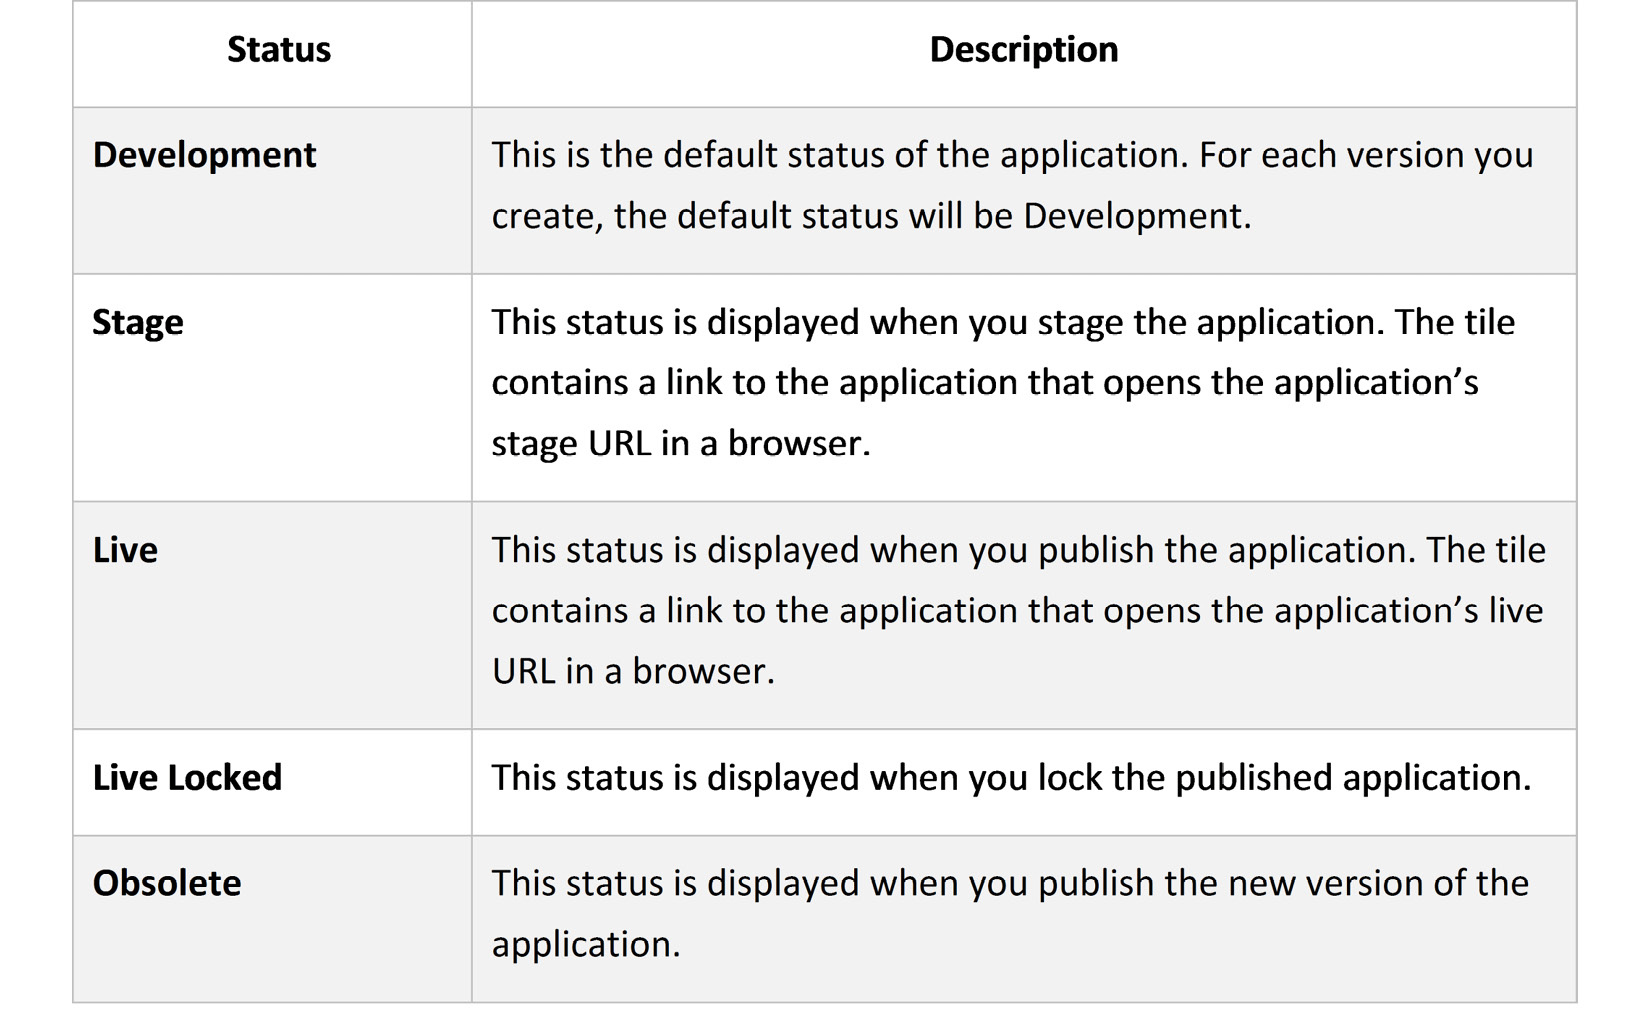 Table 13.1 – Different statuses of the application